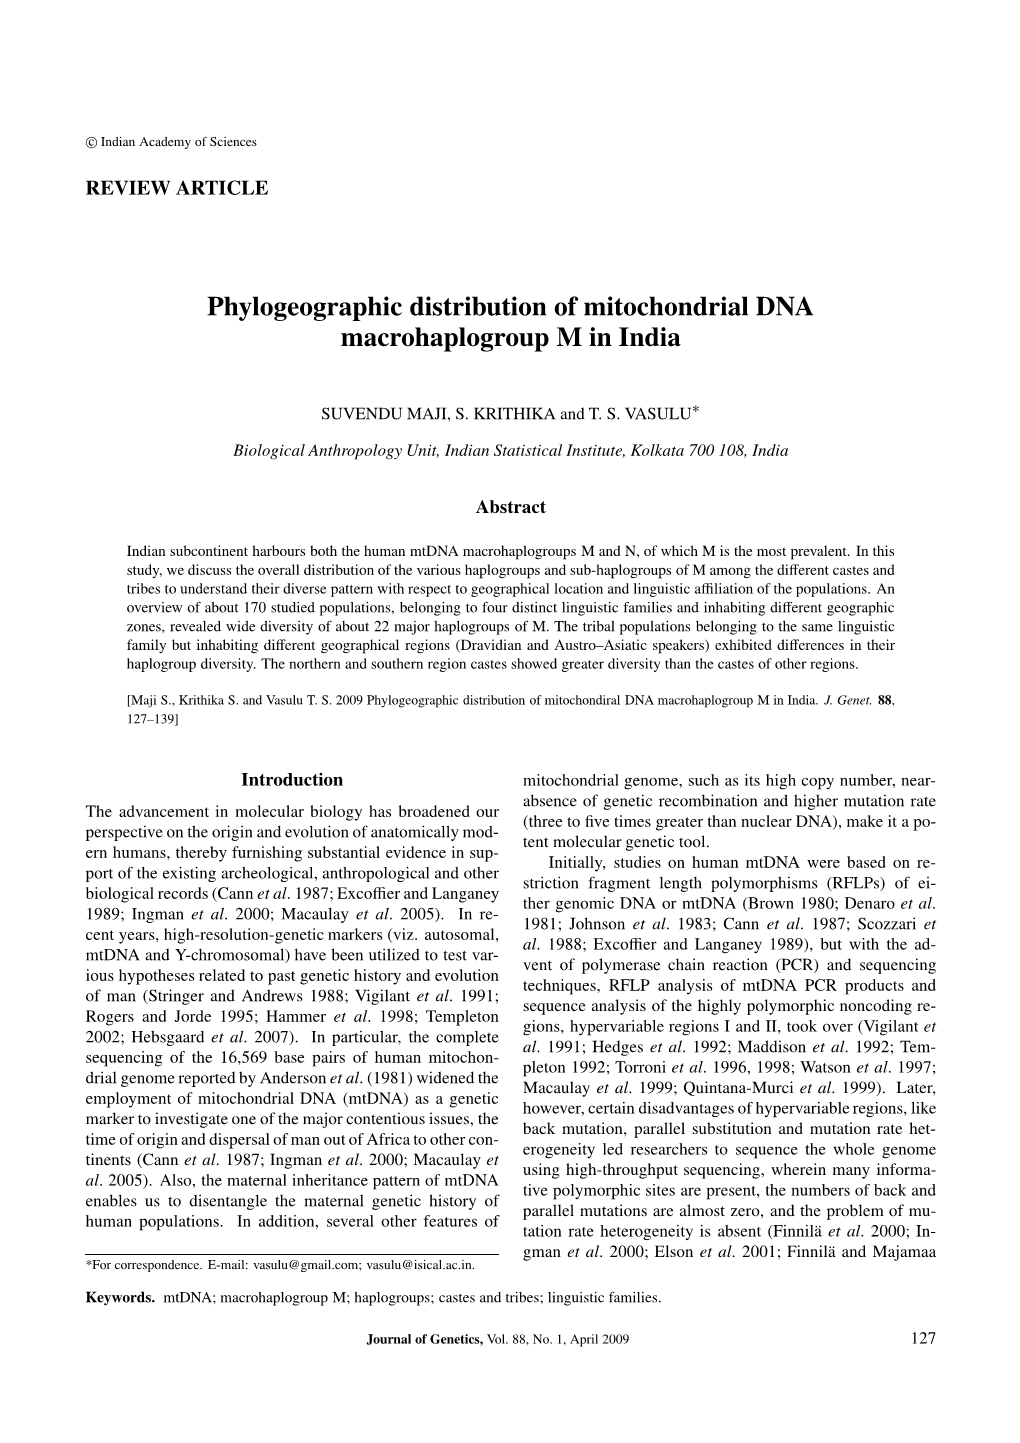 Phylogeographic Distribution of Mitochondrial DNA Macrohaplogroup M in India